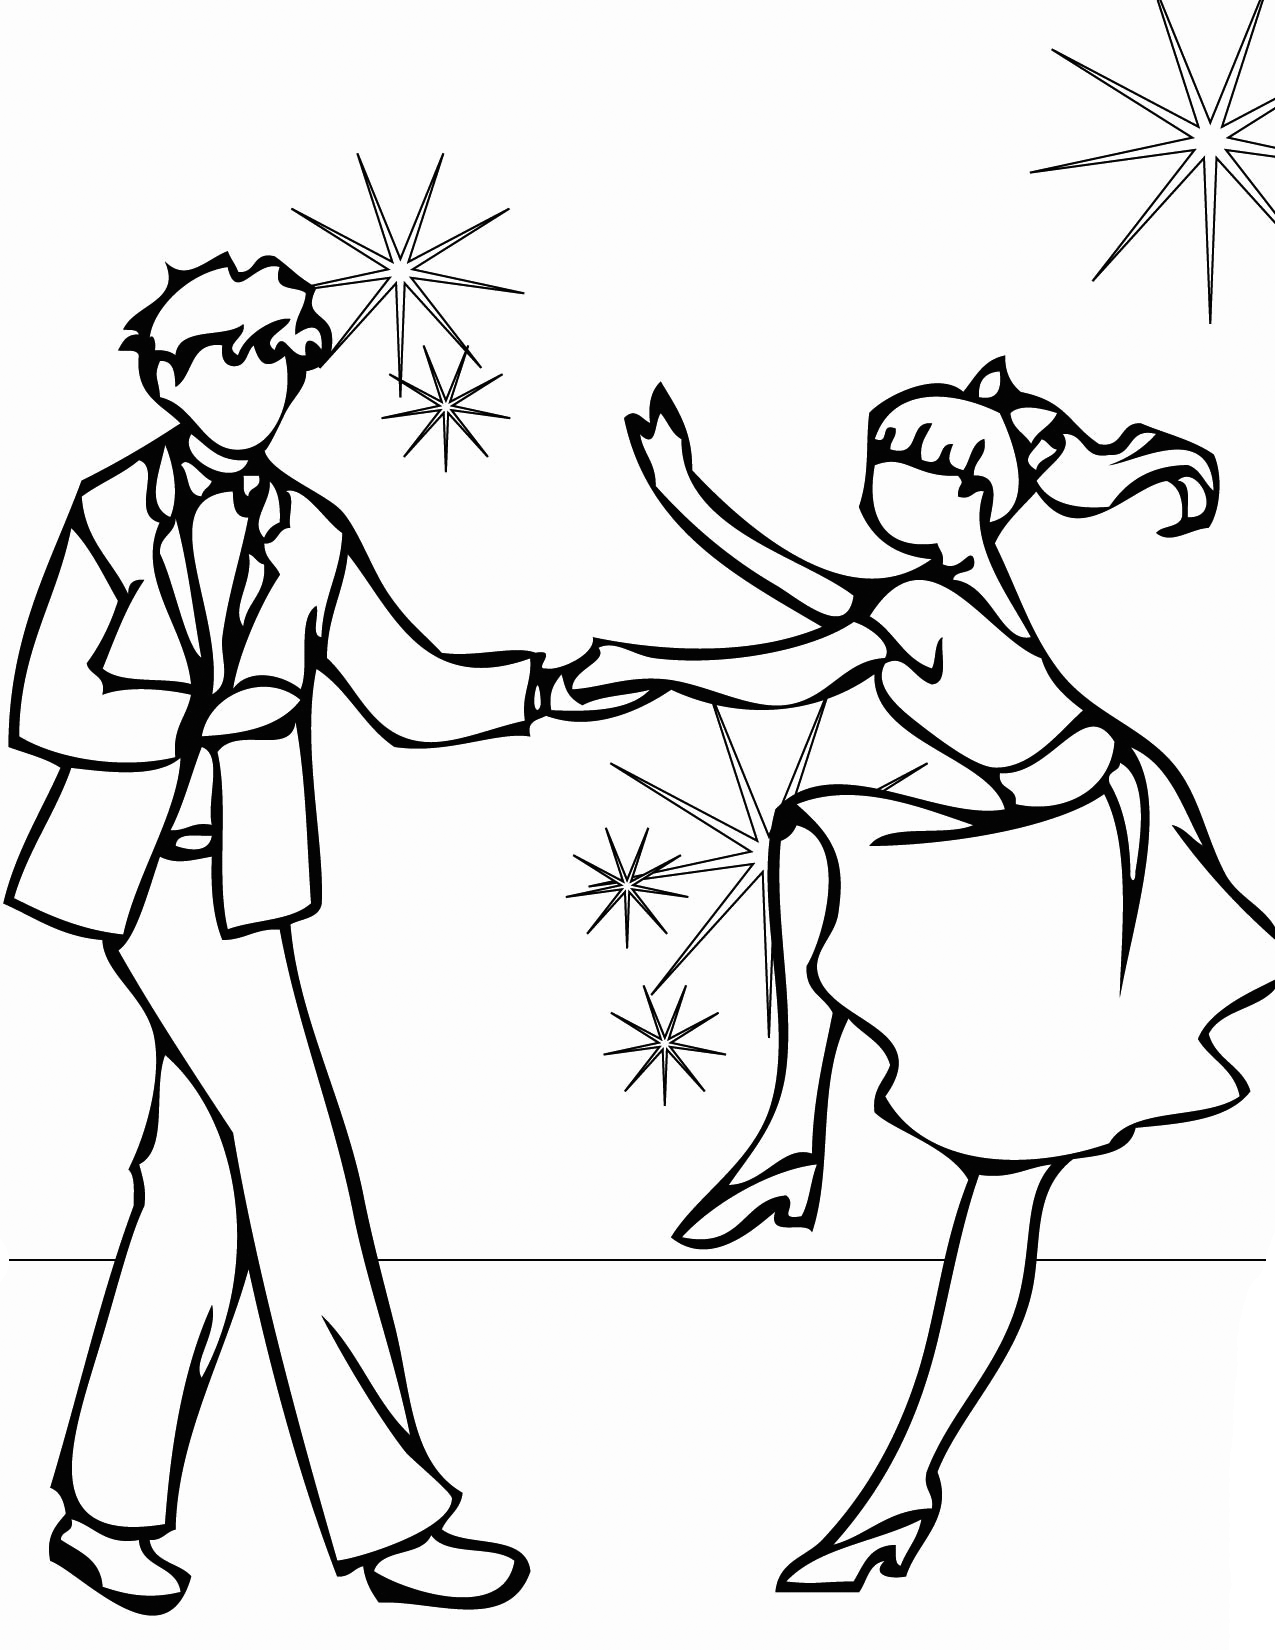 slashcasual-dancing-coloring-pages